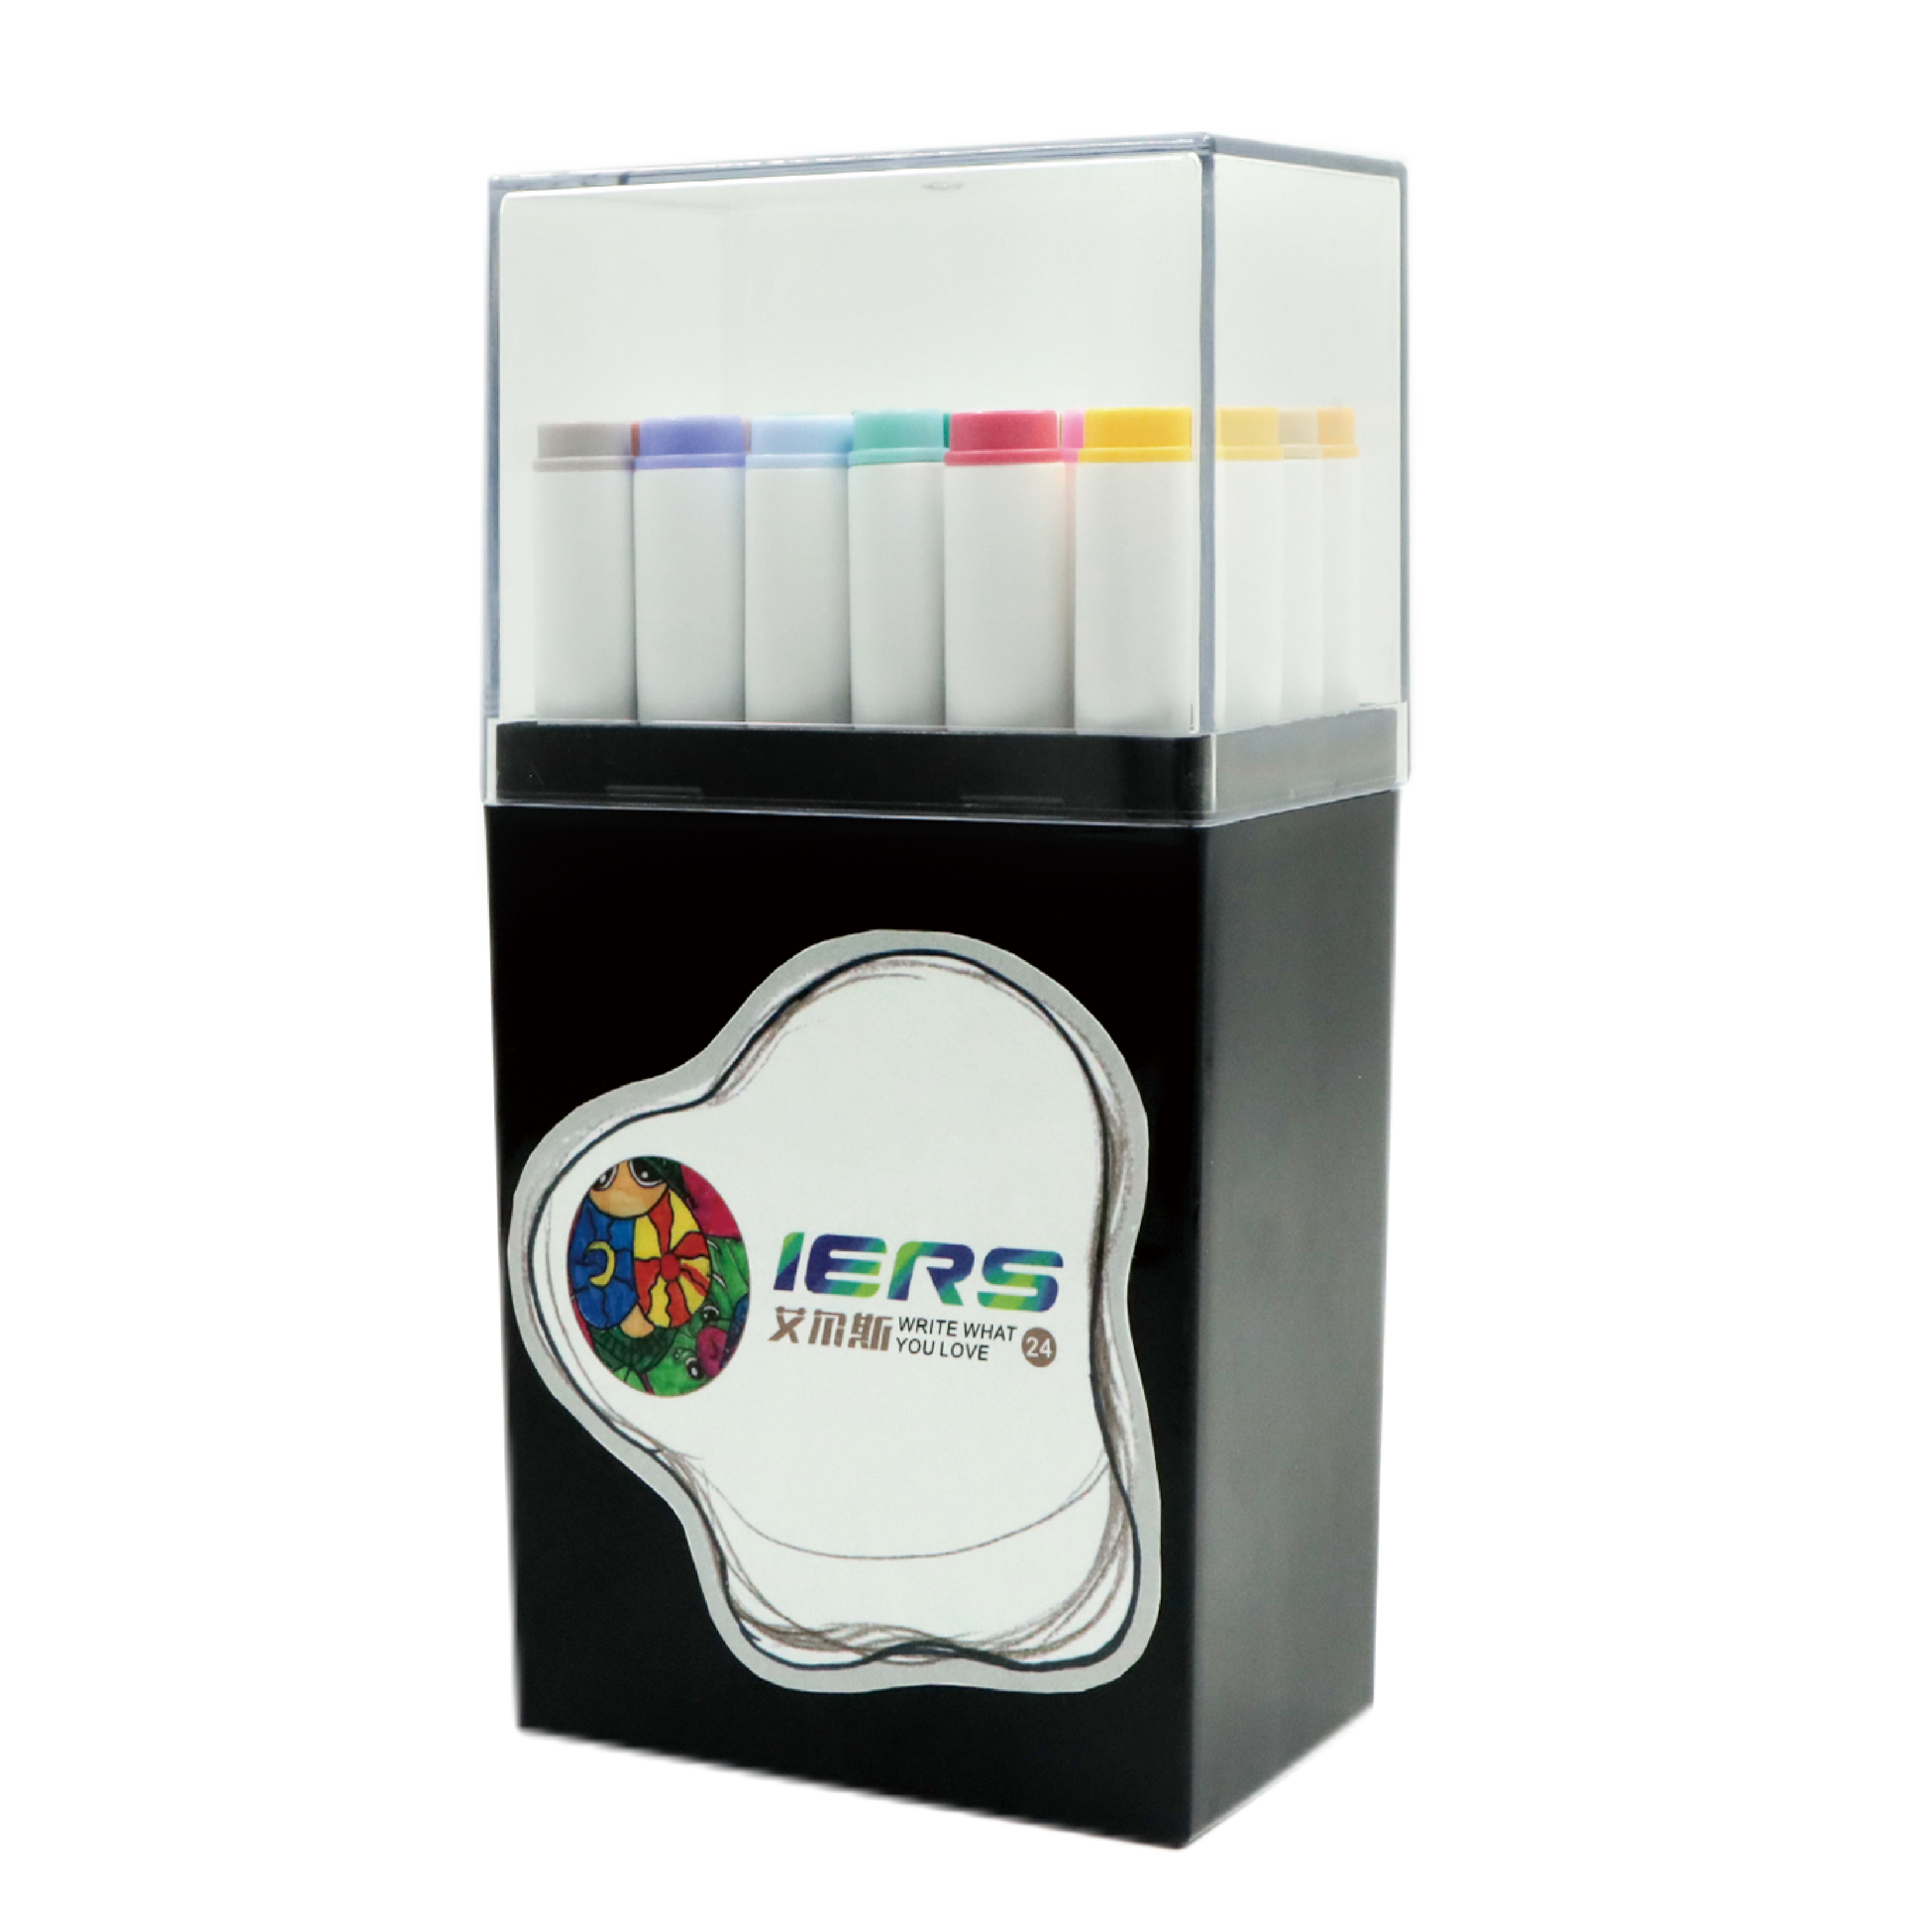 IERS-107BR Classic Dual Tips Alcohol Based Marker